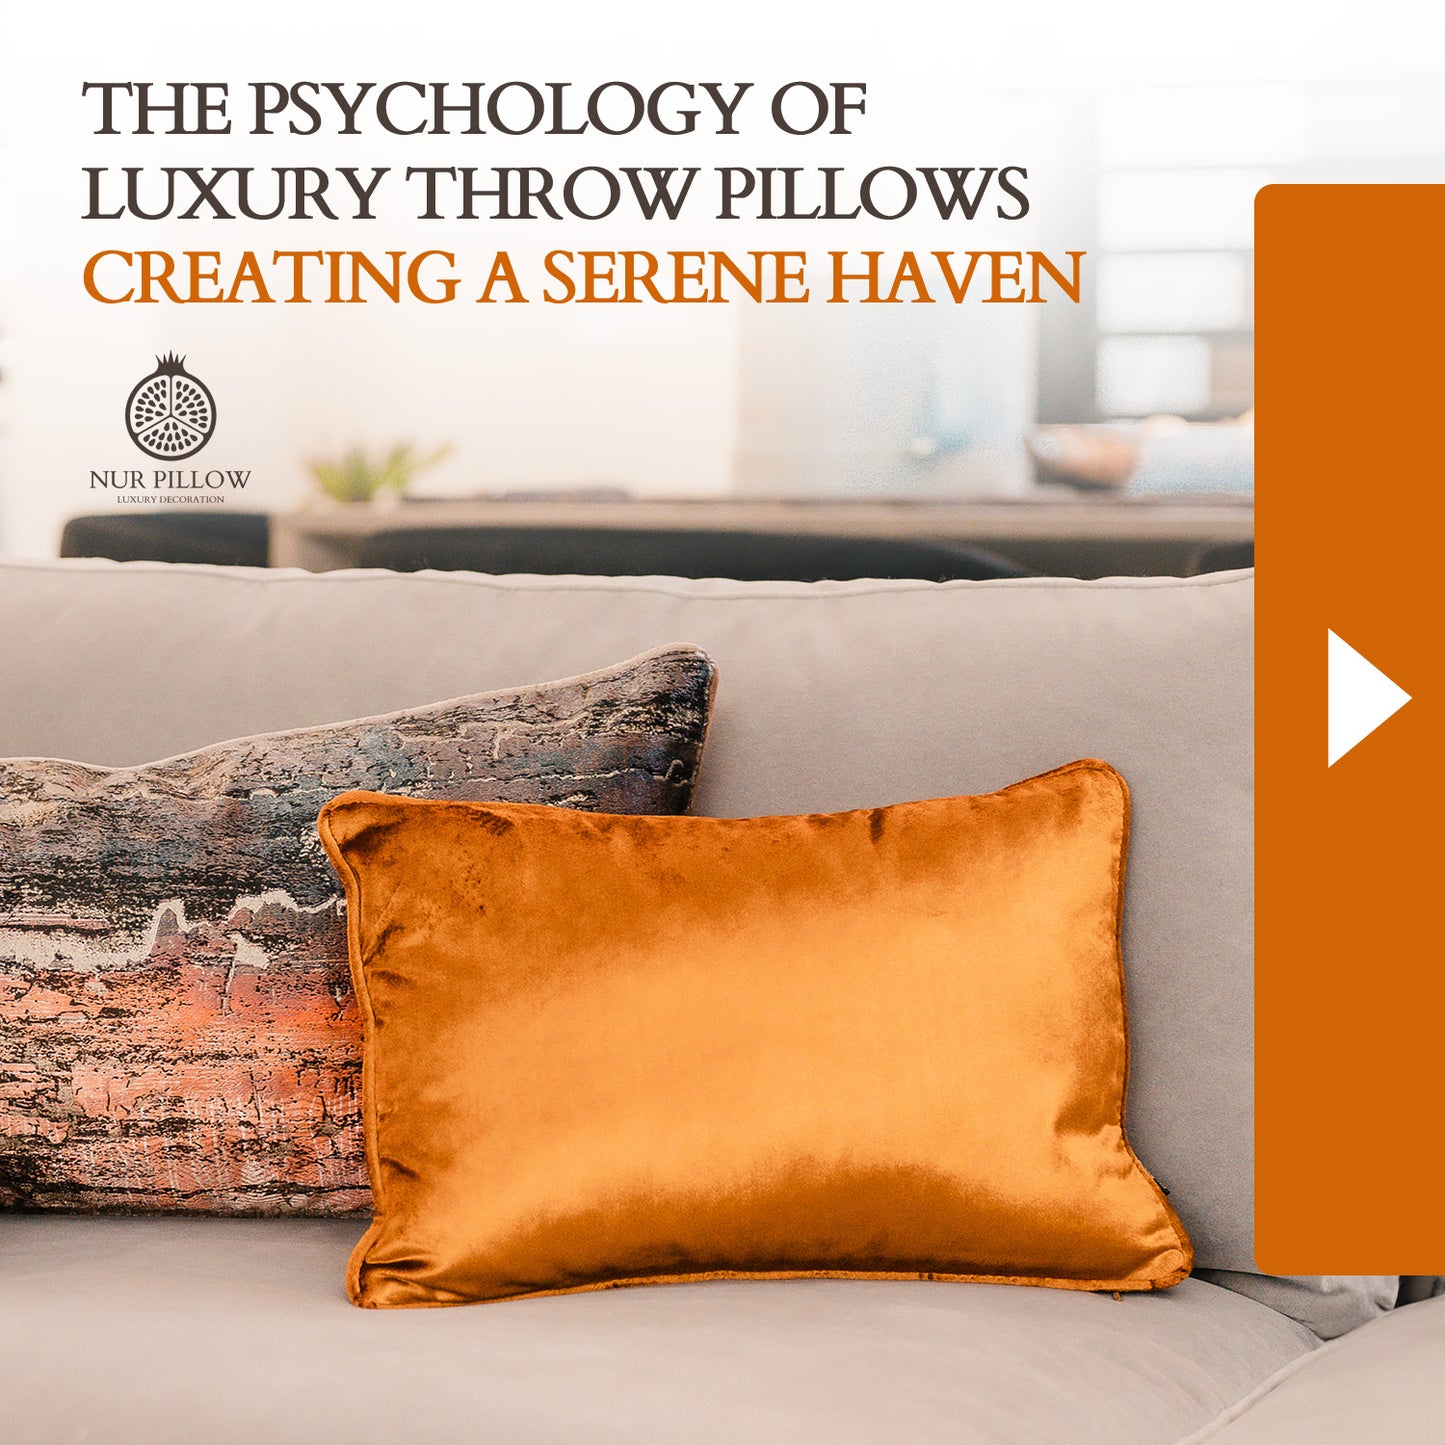 The Psychology of Luxury Throw Pillows: Creating a Serene Haven